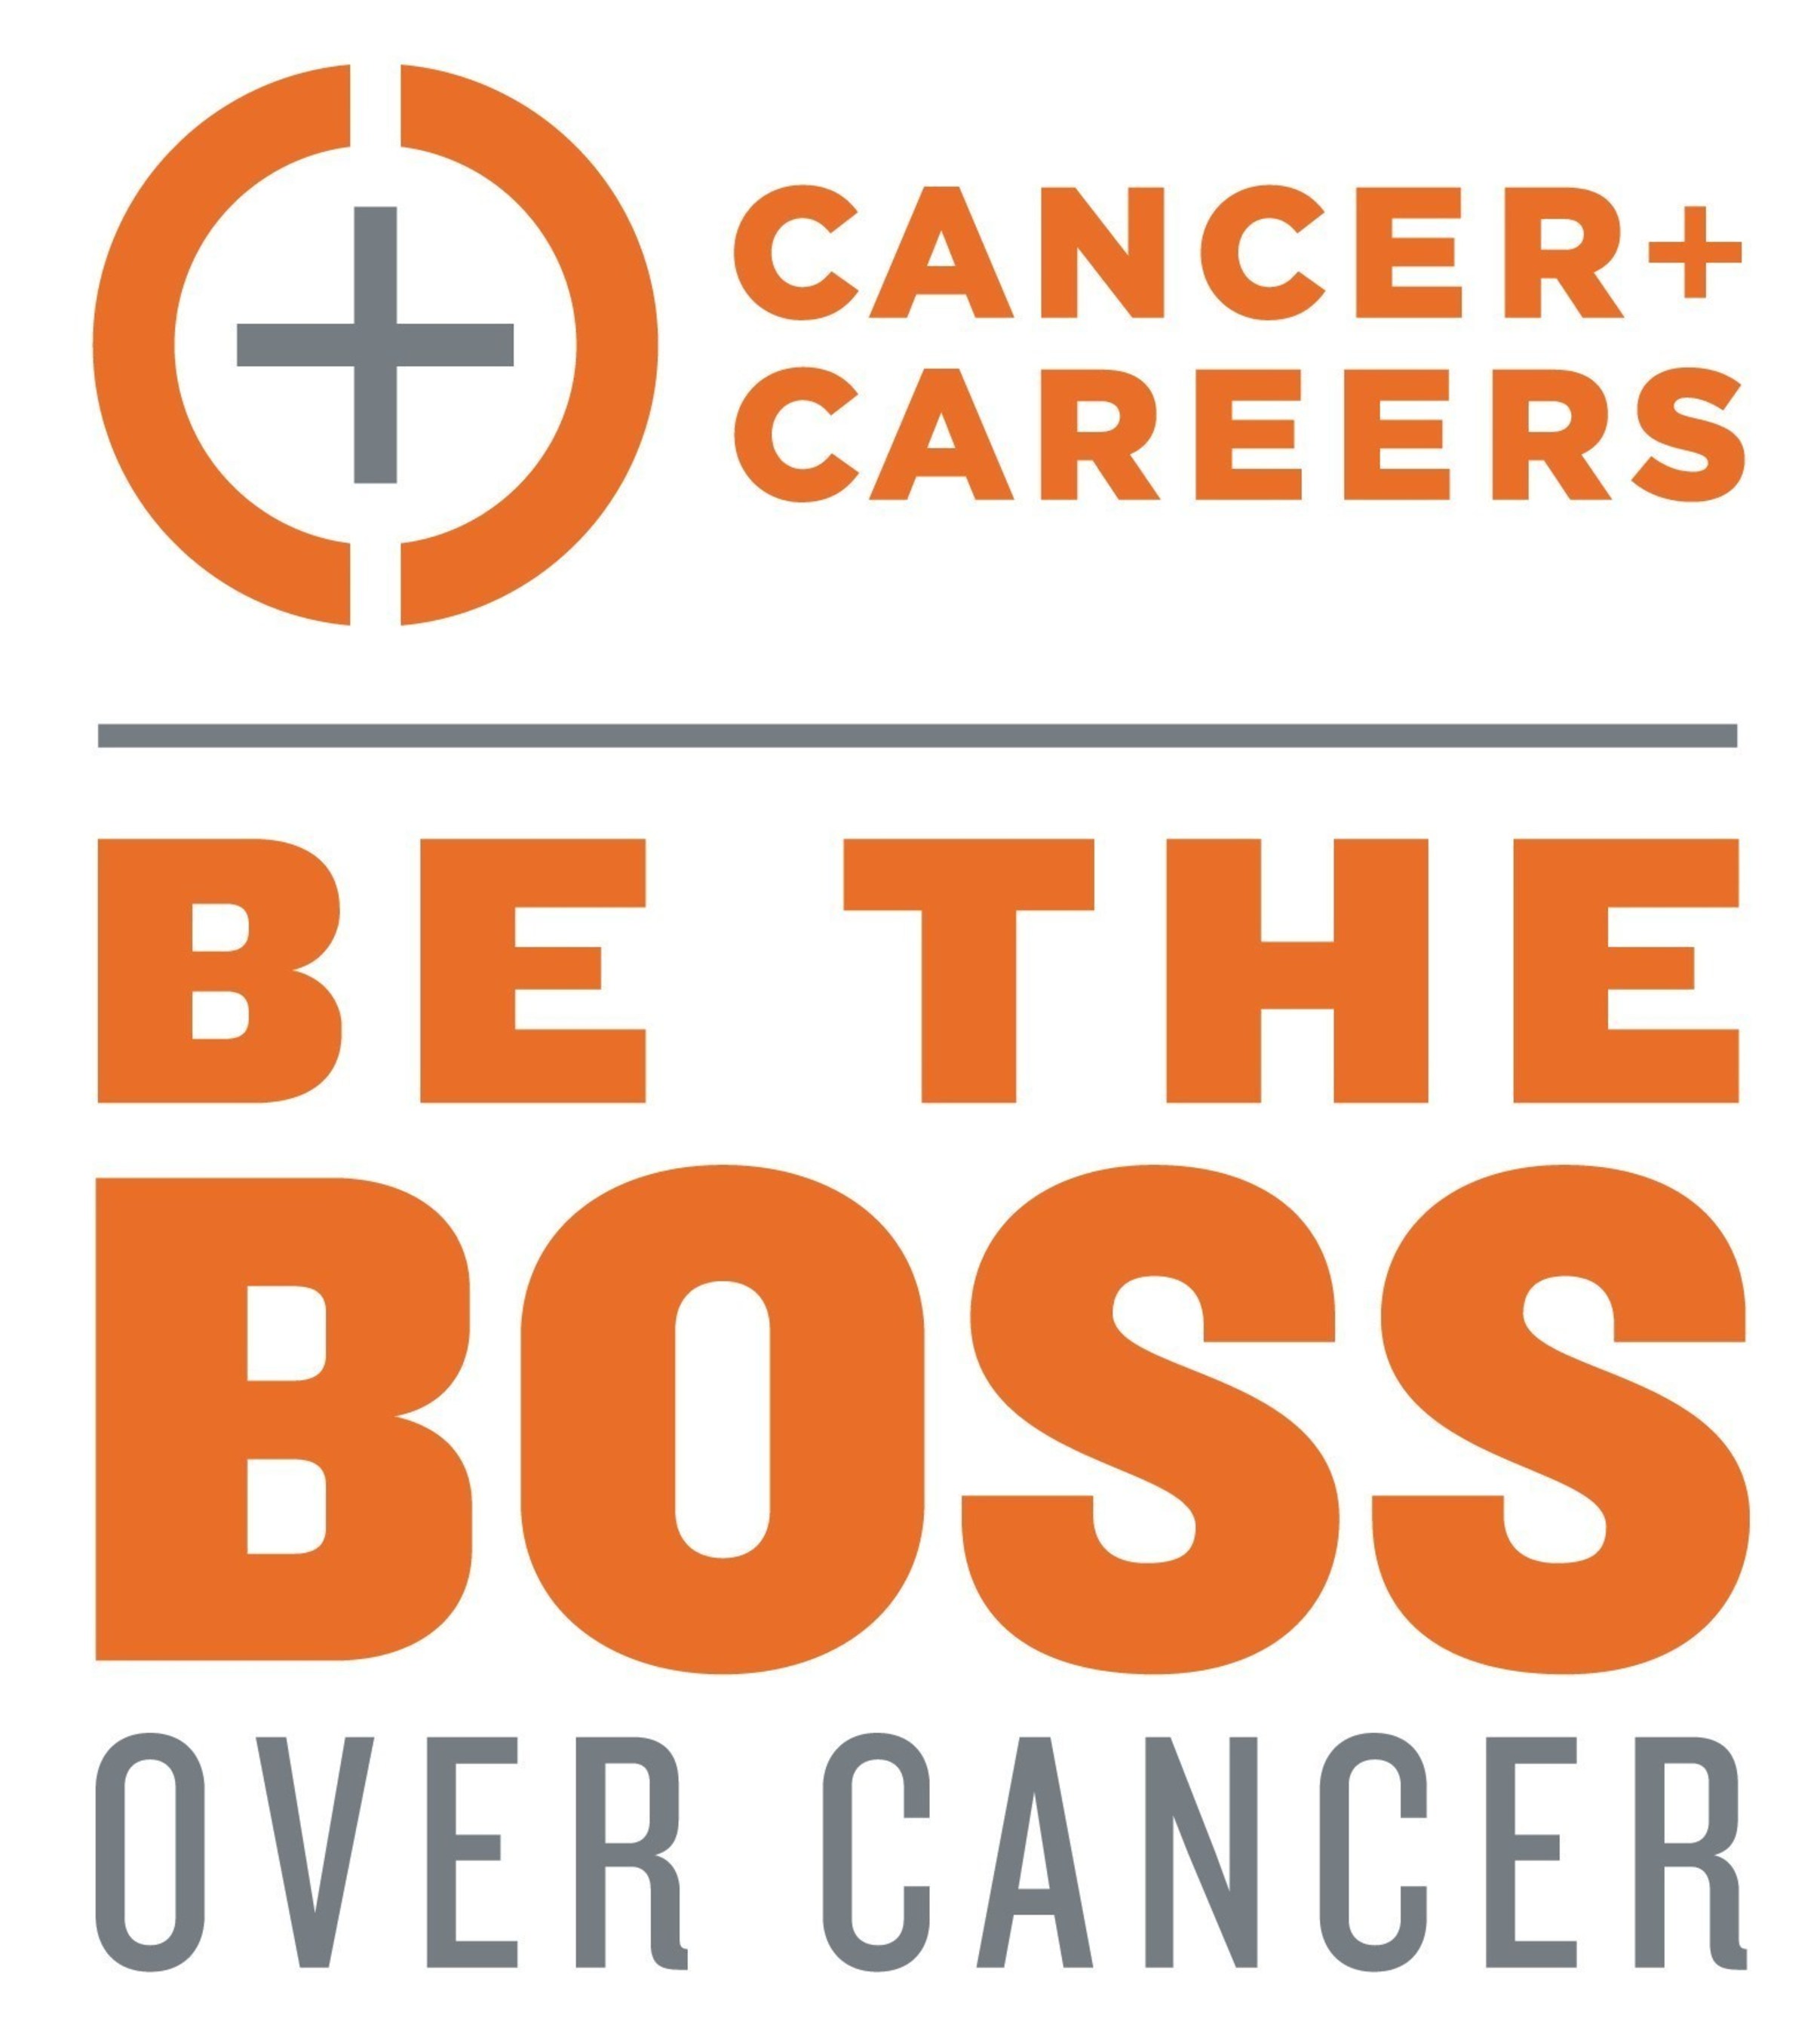 Cancer and Careers is the only U.S. organization dedicated solely to serving the growing population of people working during and after cancer treatment.